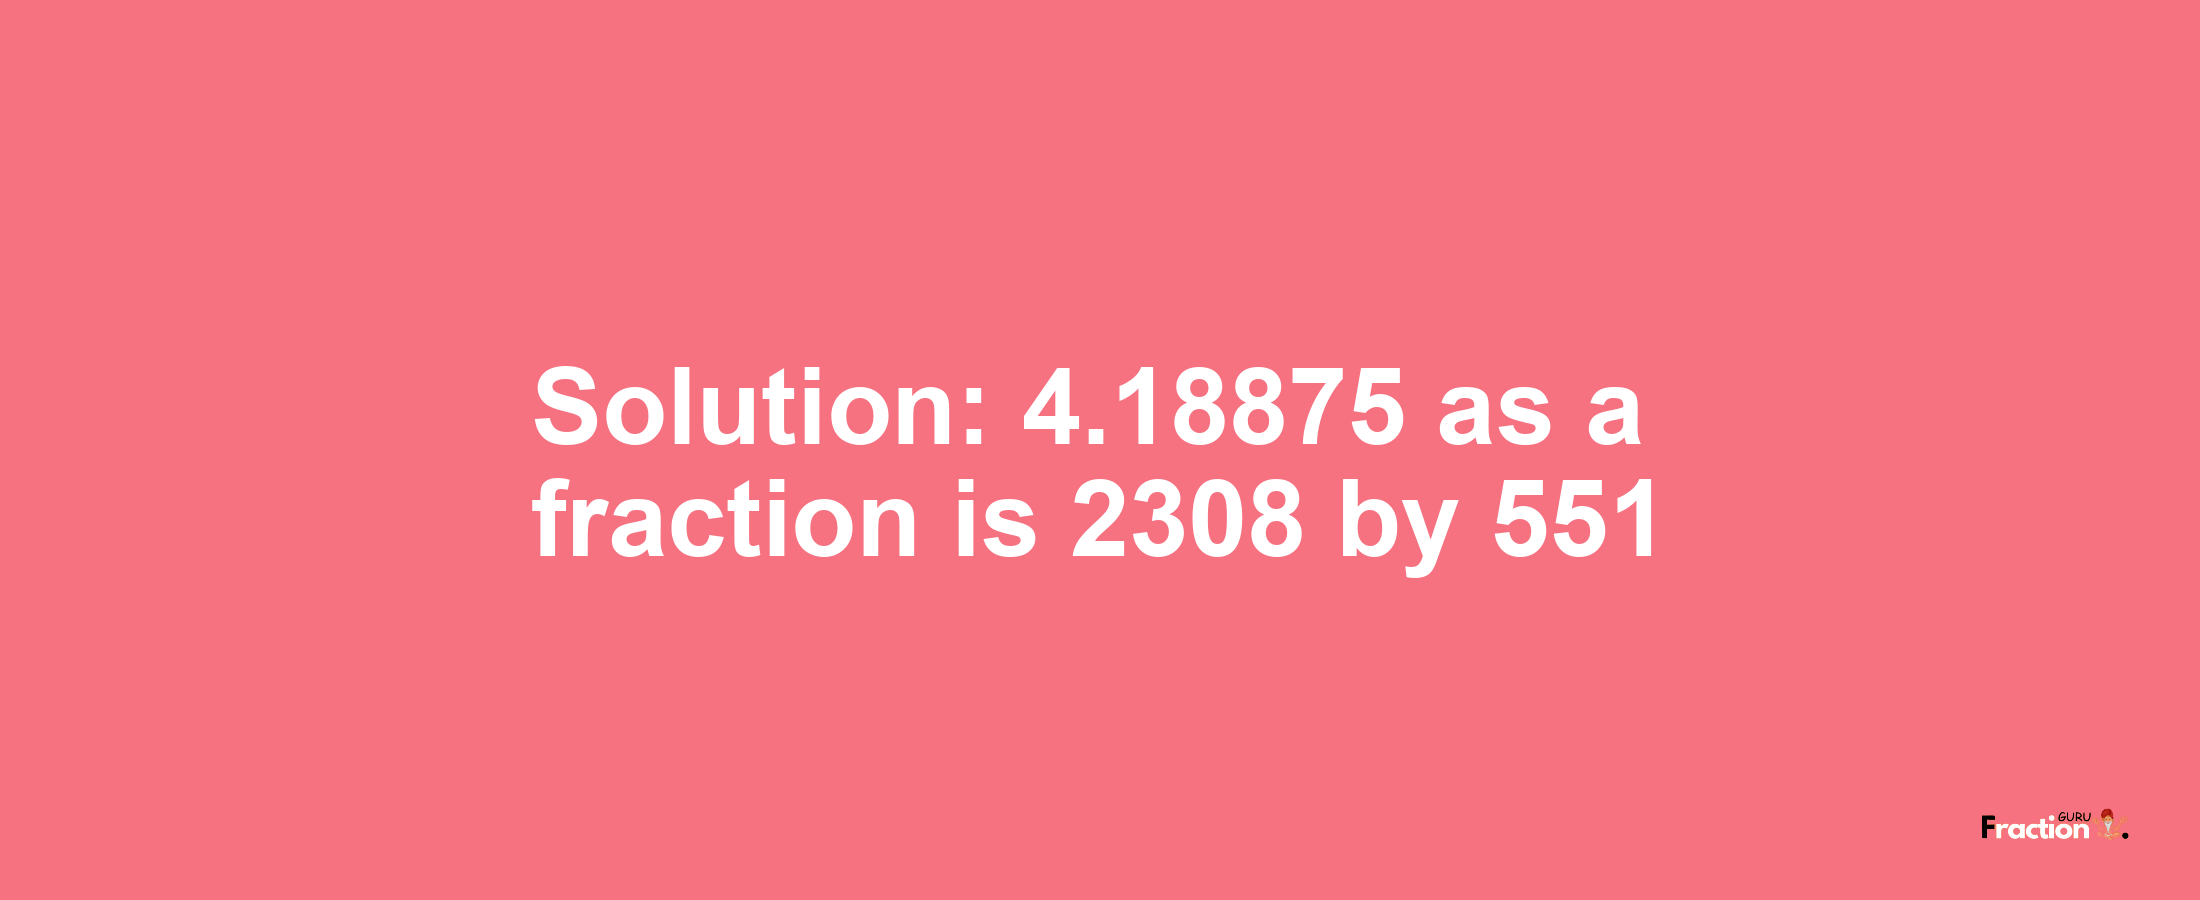 Solution:4.18875 as a fraction is 2308/551